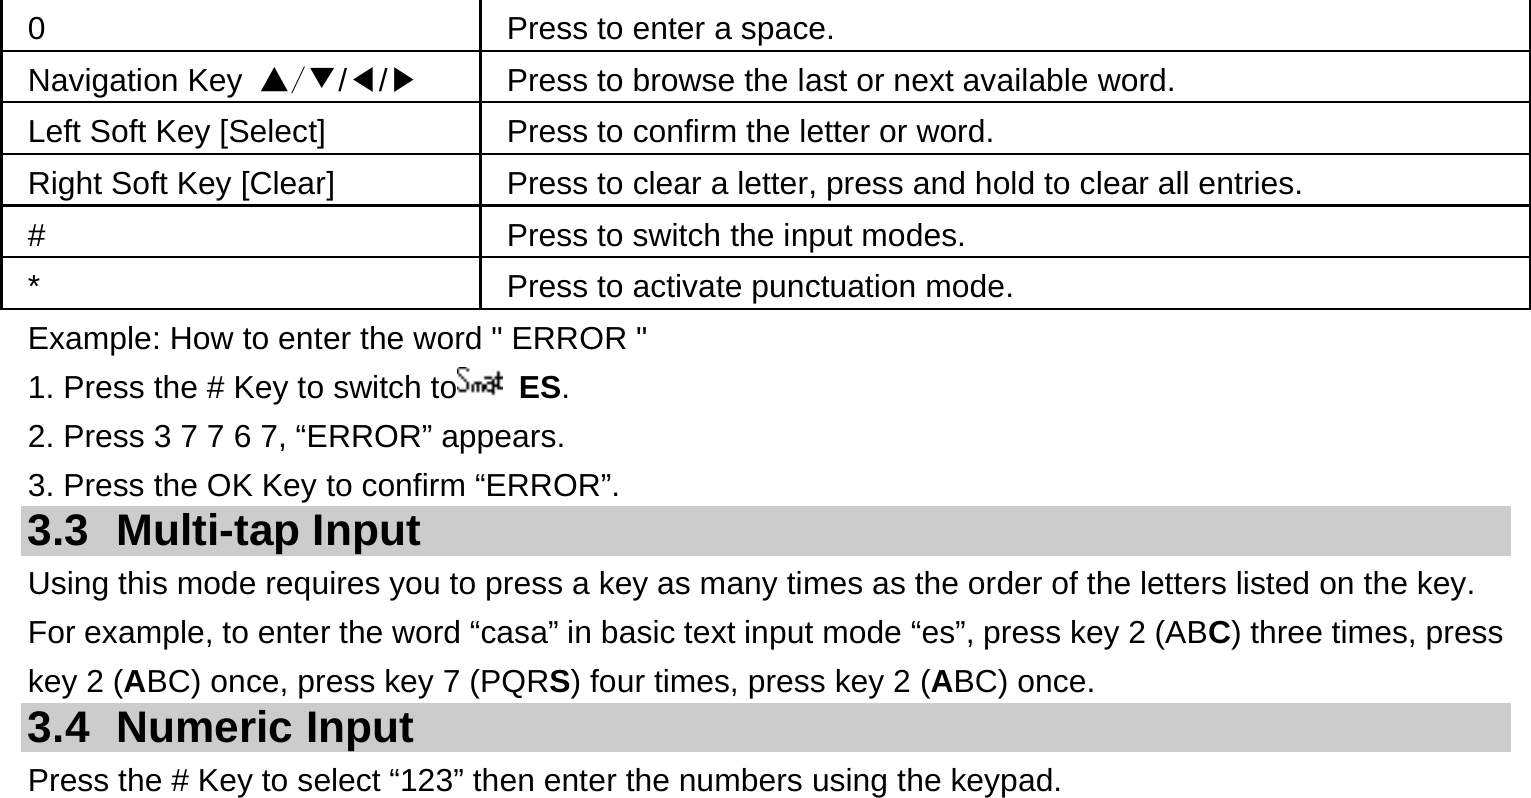 0  Press to enter a space. Navigation Key ▲/▼/◀/▶  Press to browse the last or next available word. Left Soft Key [Select]  Press to confirm the letter or word. Right Soft Key [Clear]  Press to clear a letter, press and hold to clear all entries. #  Press to switch the input modes. *  Press to activate punctuation mode. Example: How to enter the word &quot; ERROR &quot; 1. Press the # Key to switch to  ES. 2. Press 3 7 7 6 7, “ERROR” appears. 3. Press the OK Key to confirm “ERROR”. 3.3 Multi-tap Input Using this mode requires you to press a key as many times as the order of the letters listed on the key. For example, to enter the word “casa” in basic text input mode “es”, press key 2 (ABC) three times, press key 2 (ABC) once, press key 7 (PQRS) four times, press key 2 (ABC) once. 3.4 Numeric Input Press the # Key to select “123” then enter the numbers using the keypad.    